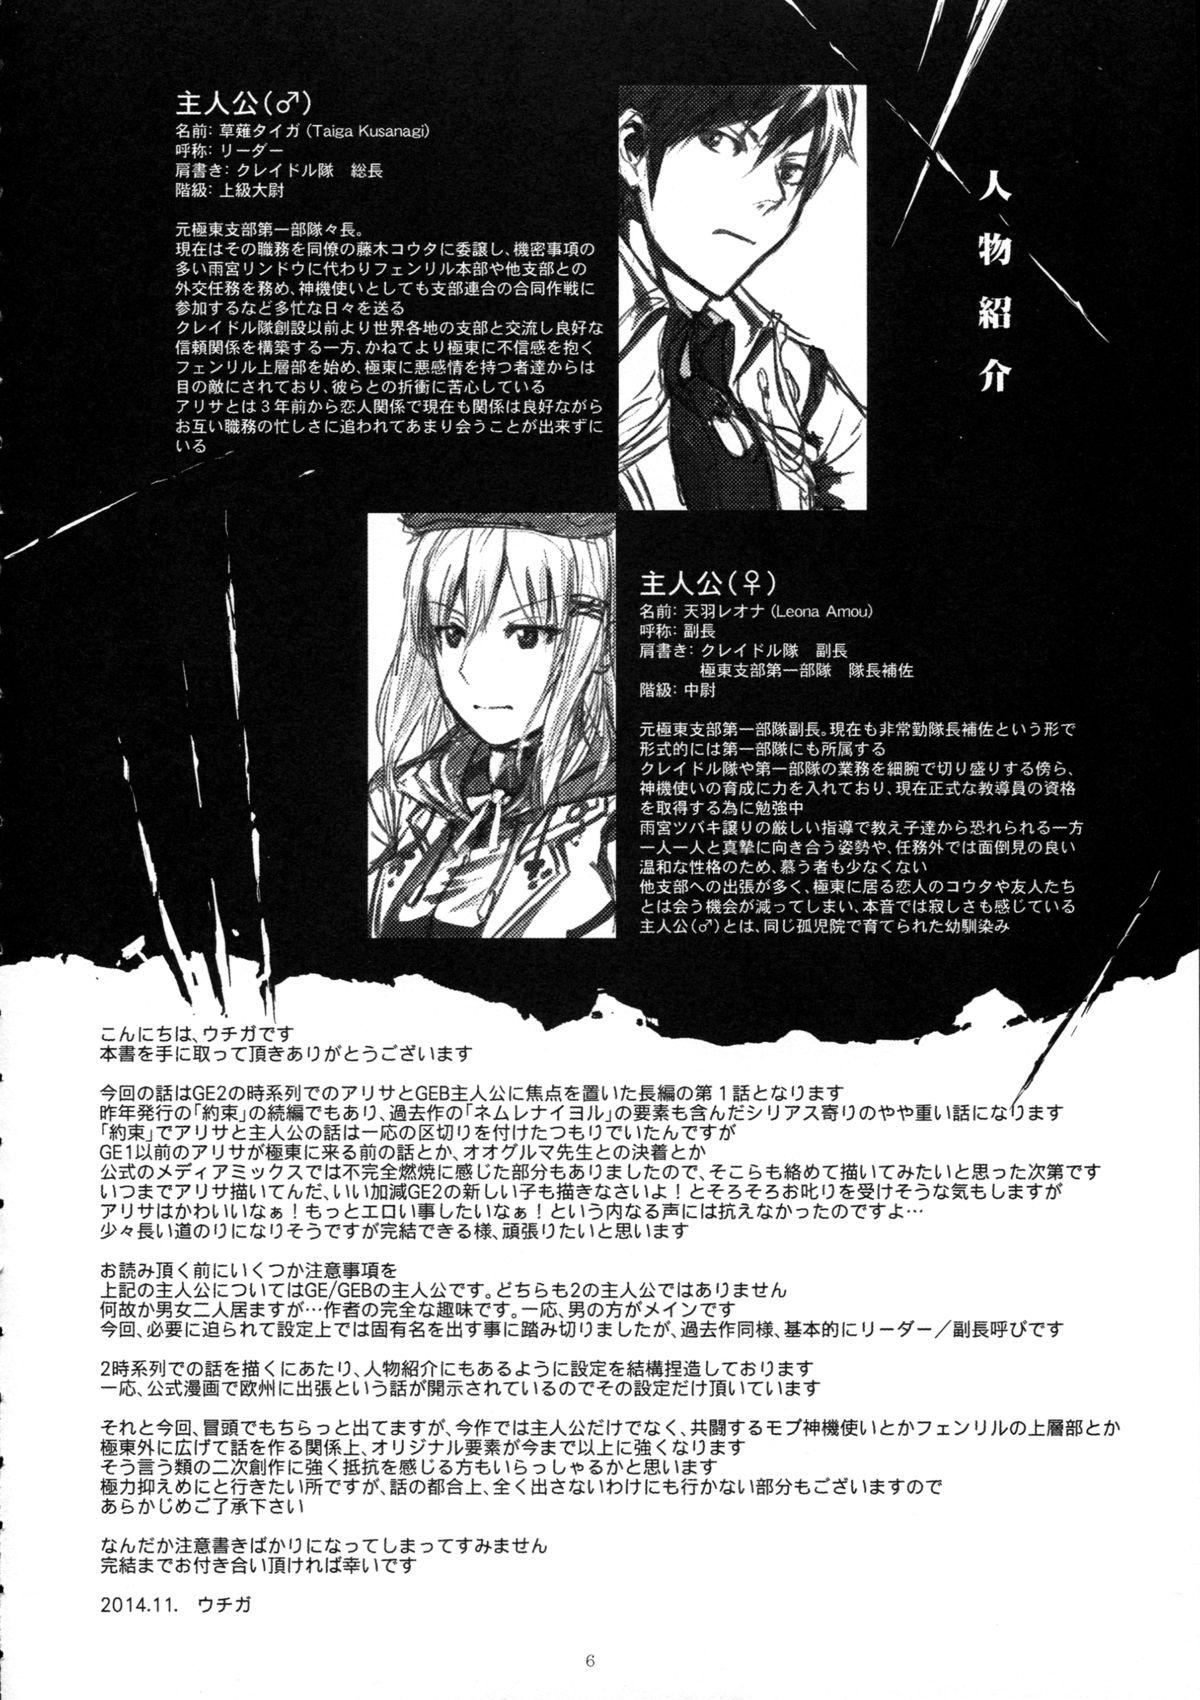 Culazo Again #1 Stay With Me Till Dawn - God eater Pickup - Page 6